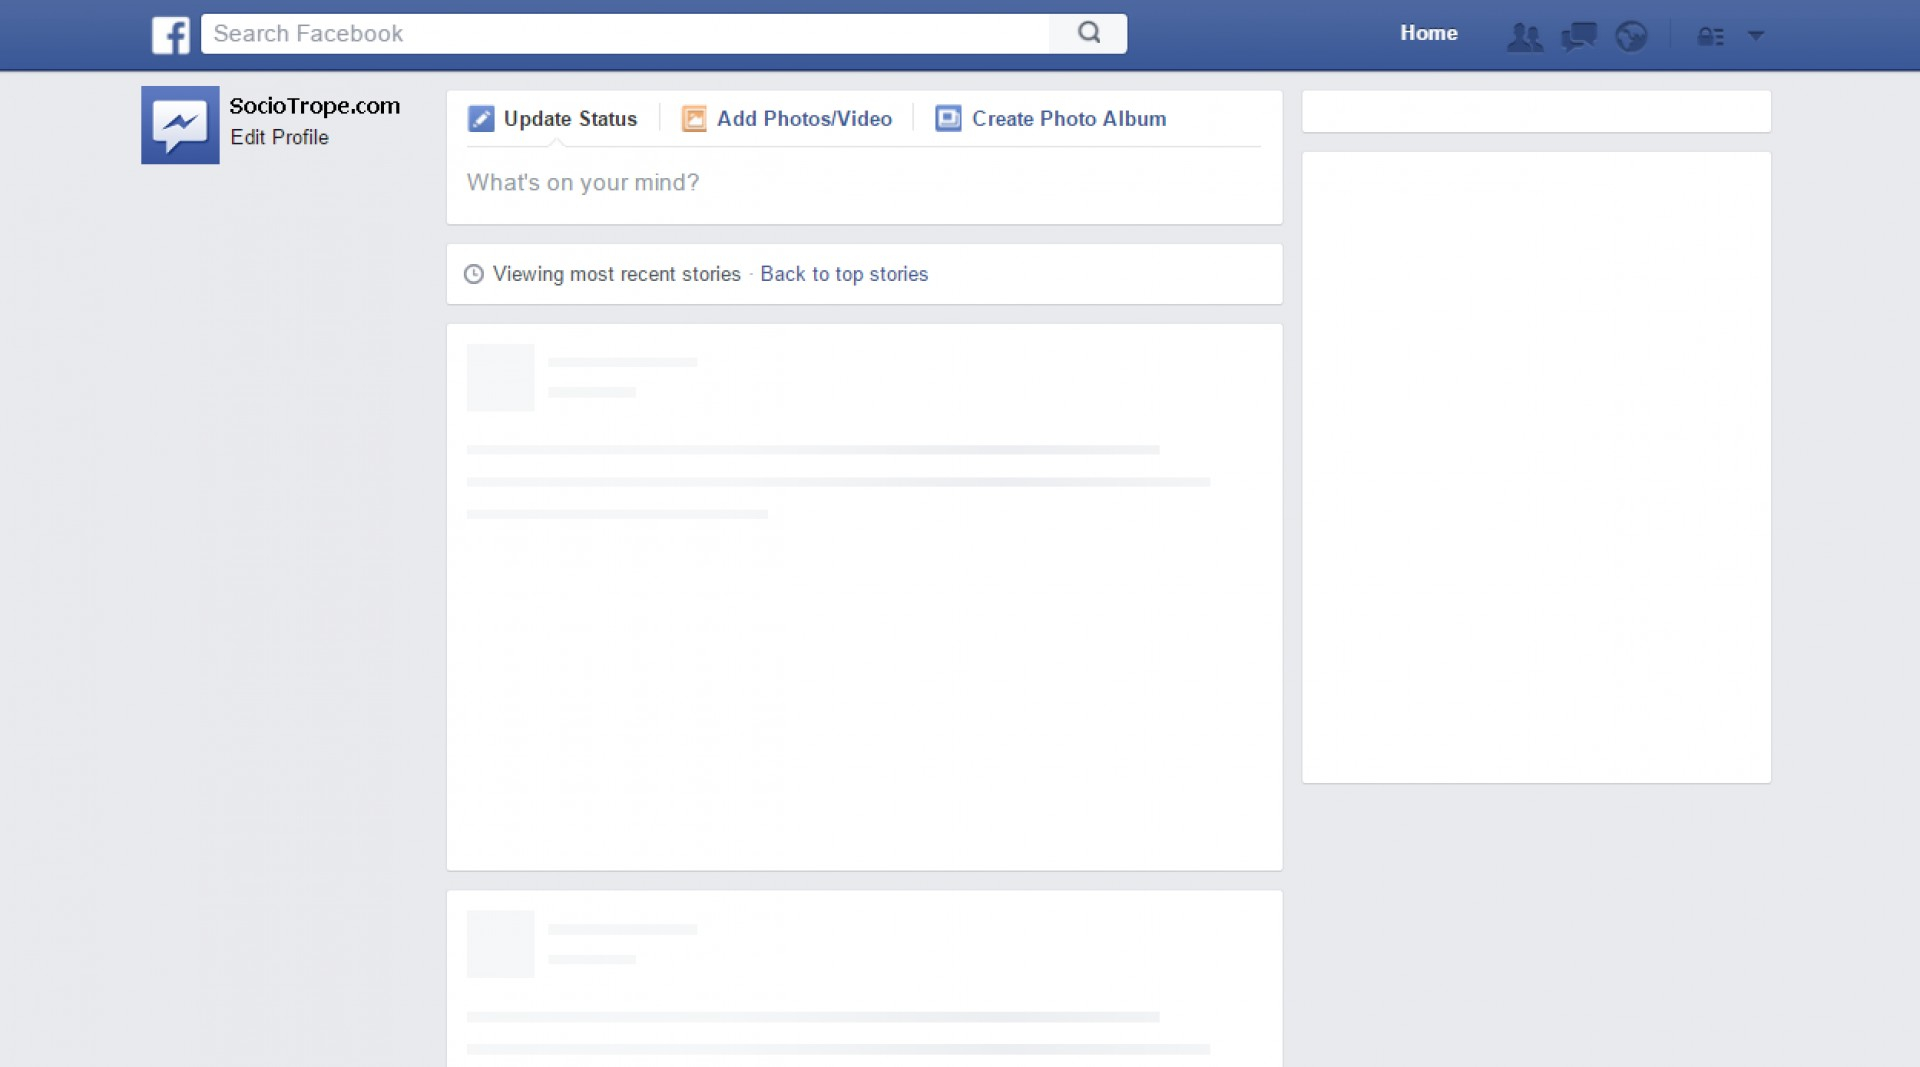 036 Facebook Profile Page Template Incredible Ideas Fb Html5 Within Html5 Blank Page Template